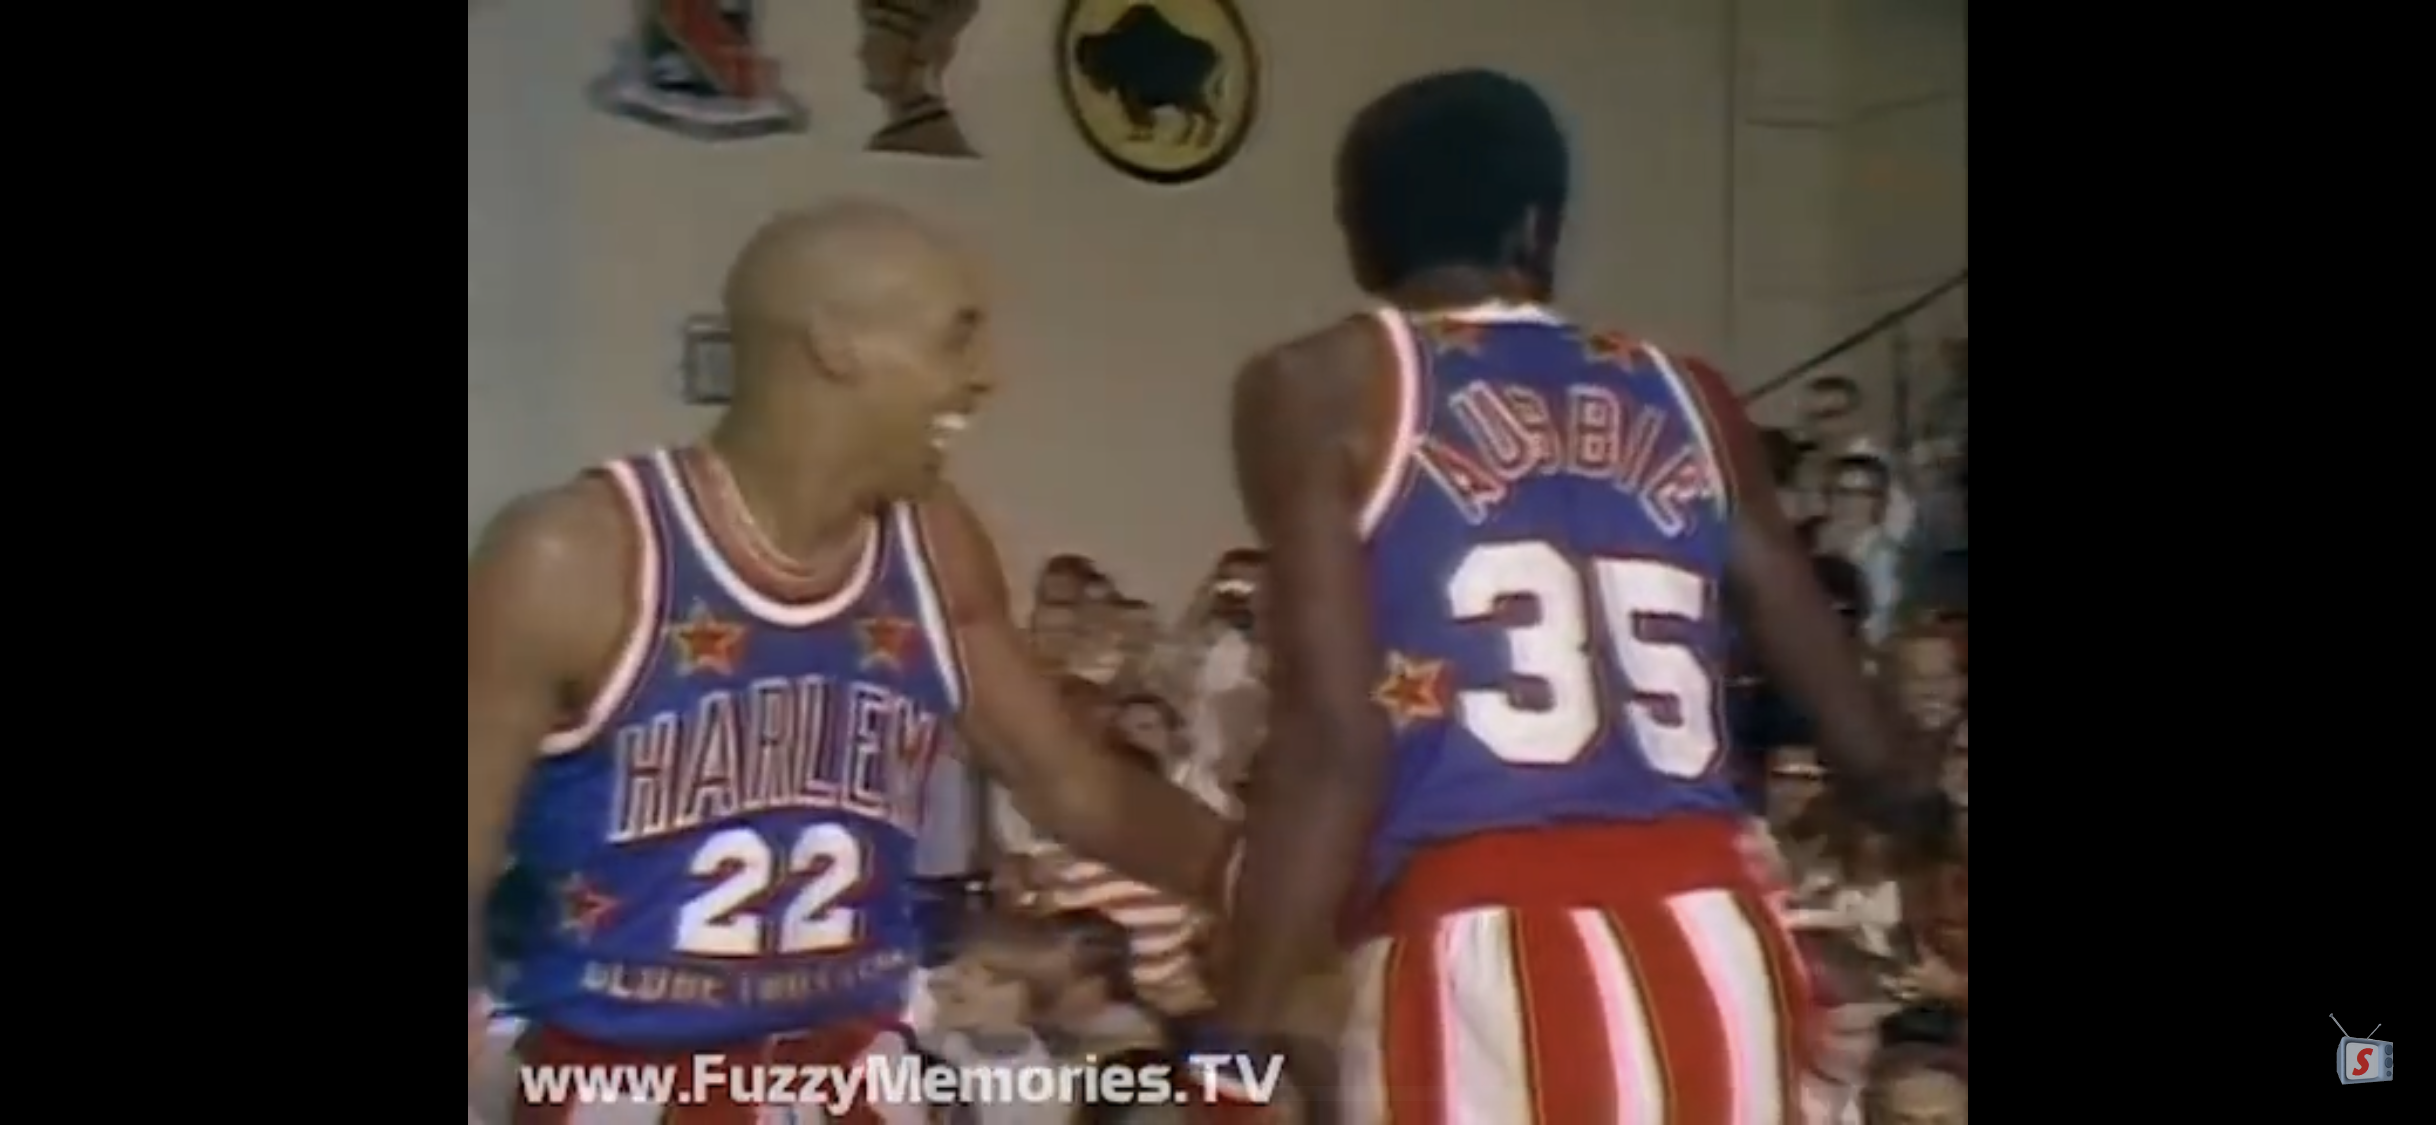 Fred Curly Neal - "The Harlem Globetrotters in Sierra Vista" (1978)